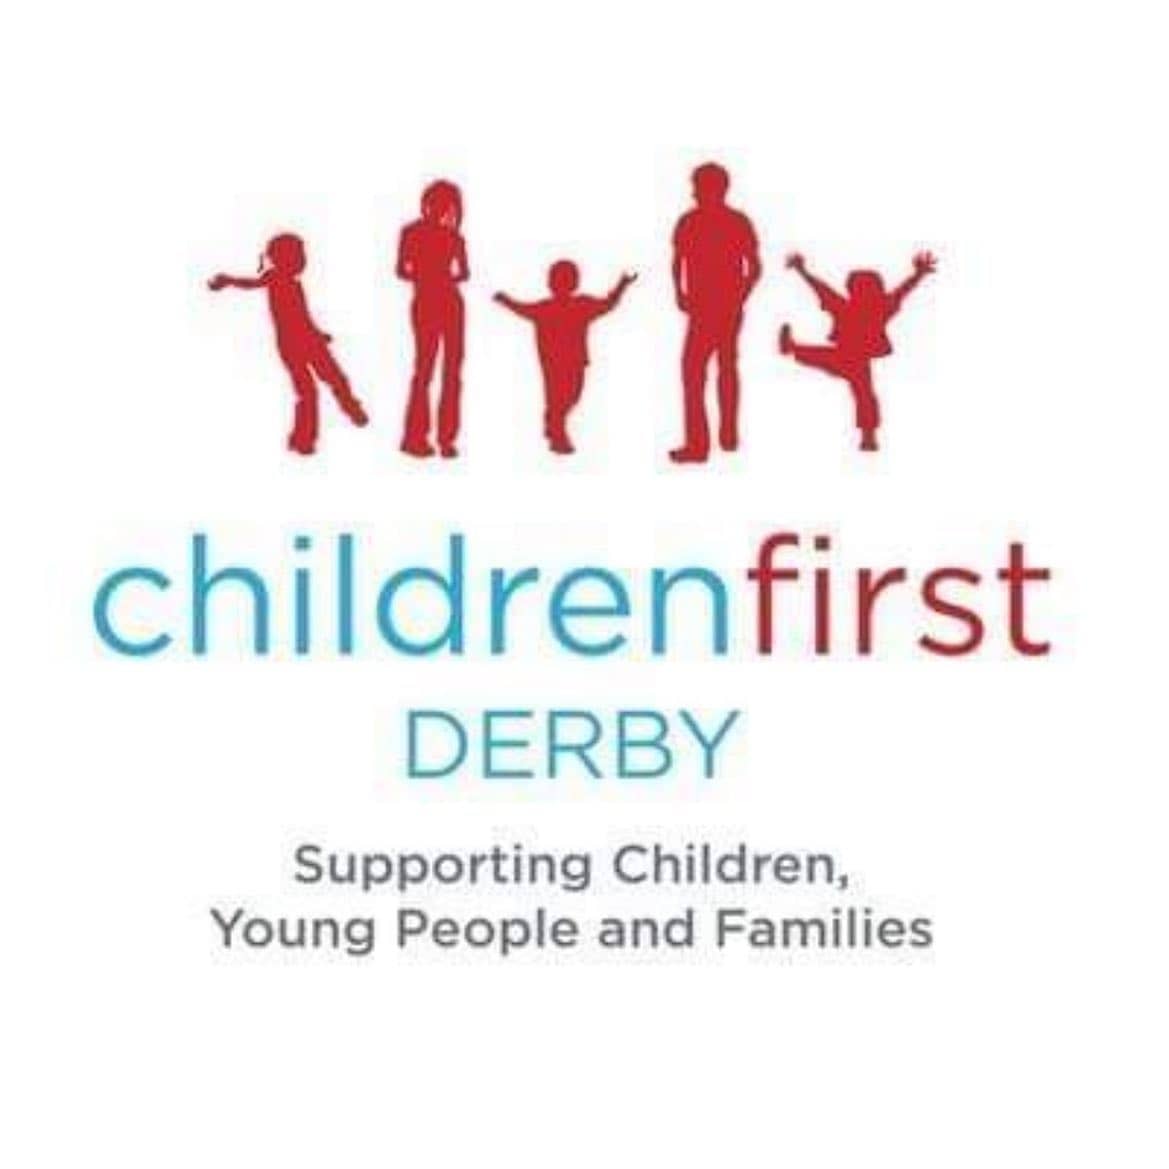 This Charity Tuesday we're celebrating @childrenfirstderby who are raising funds at the Peak Dist...